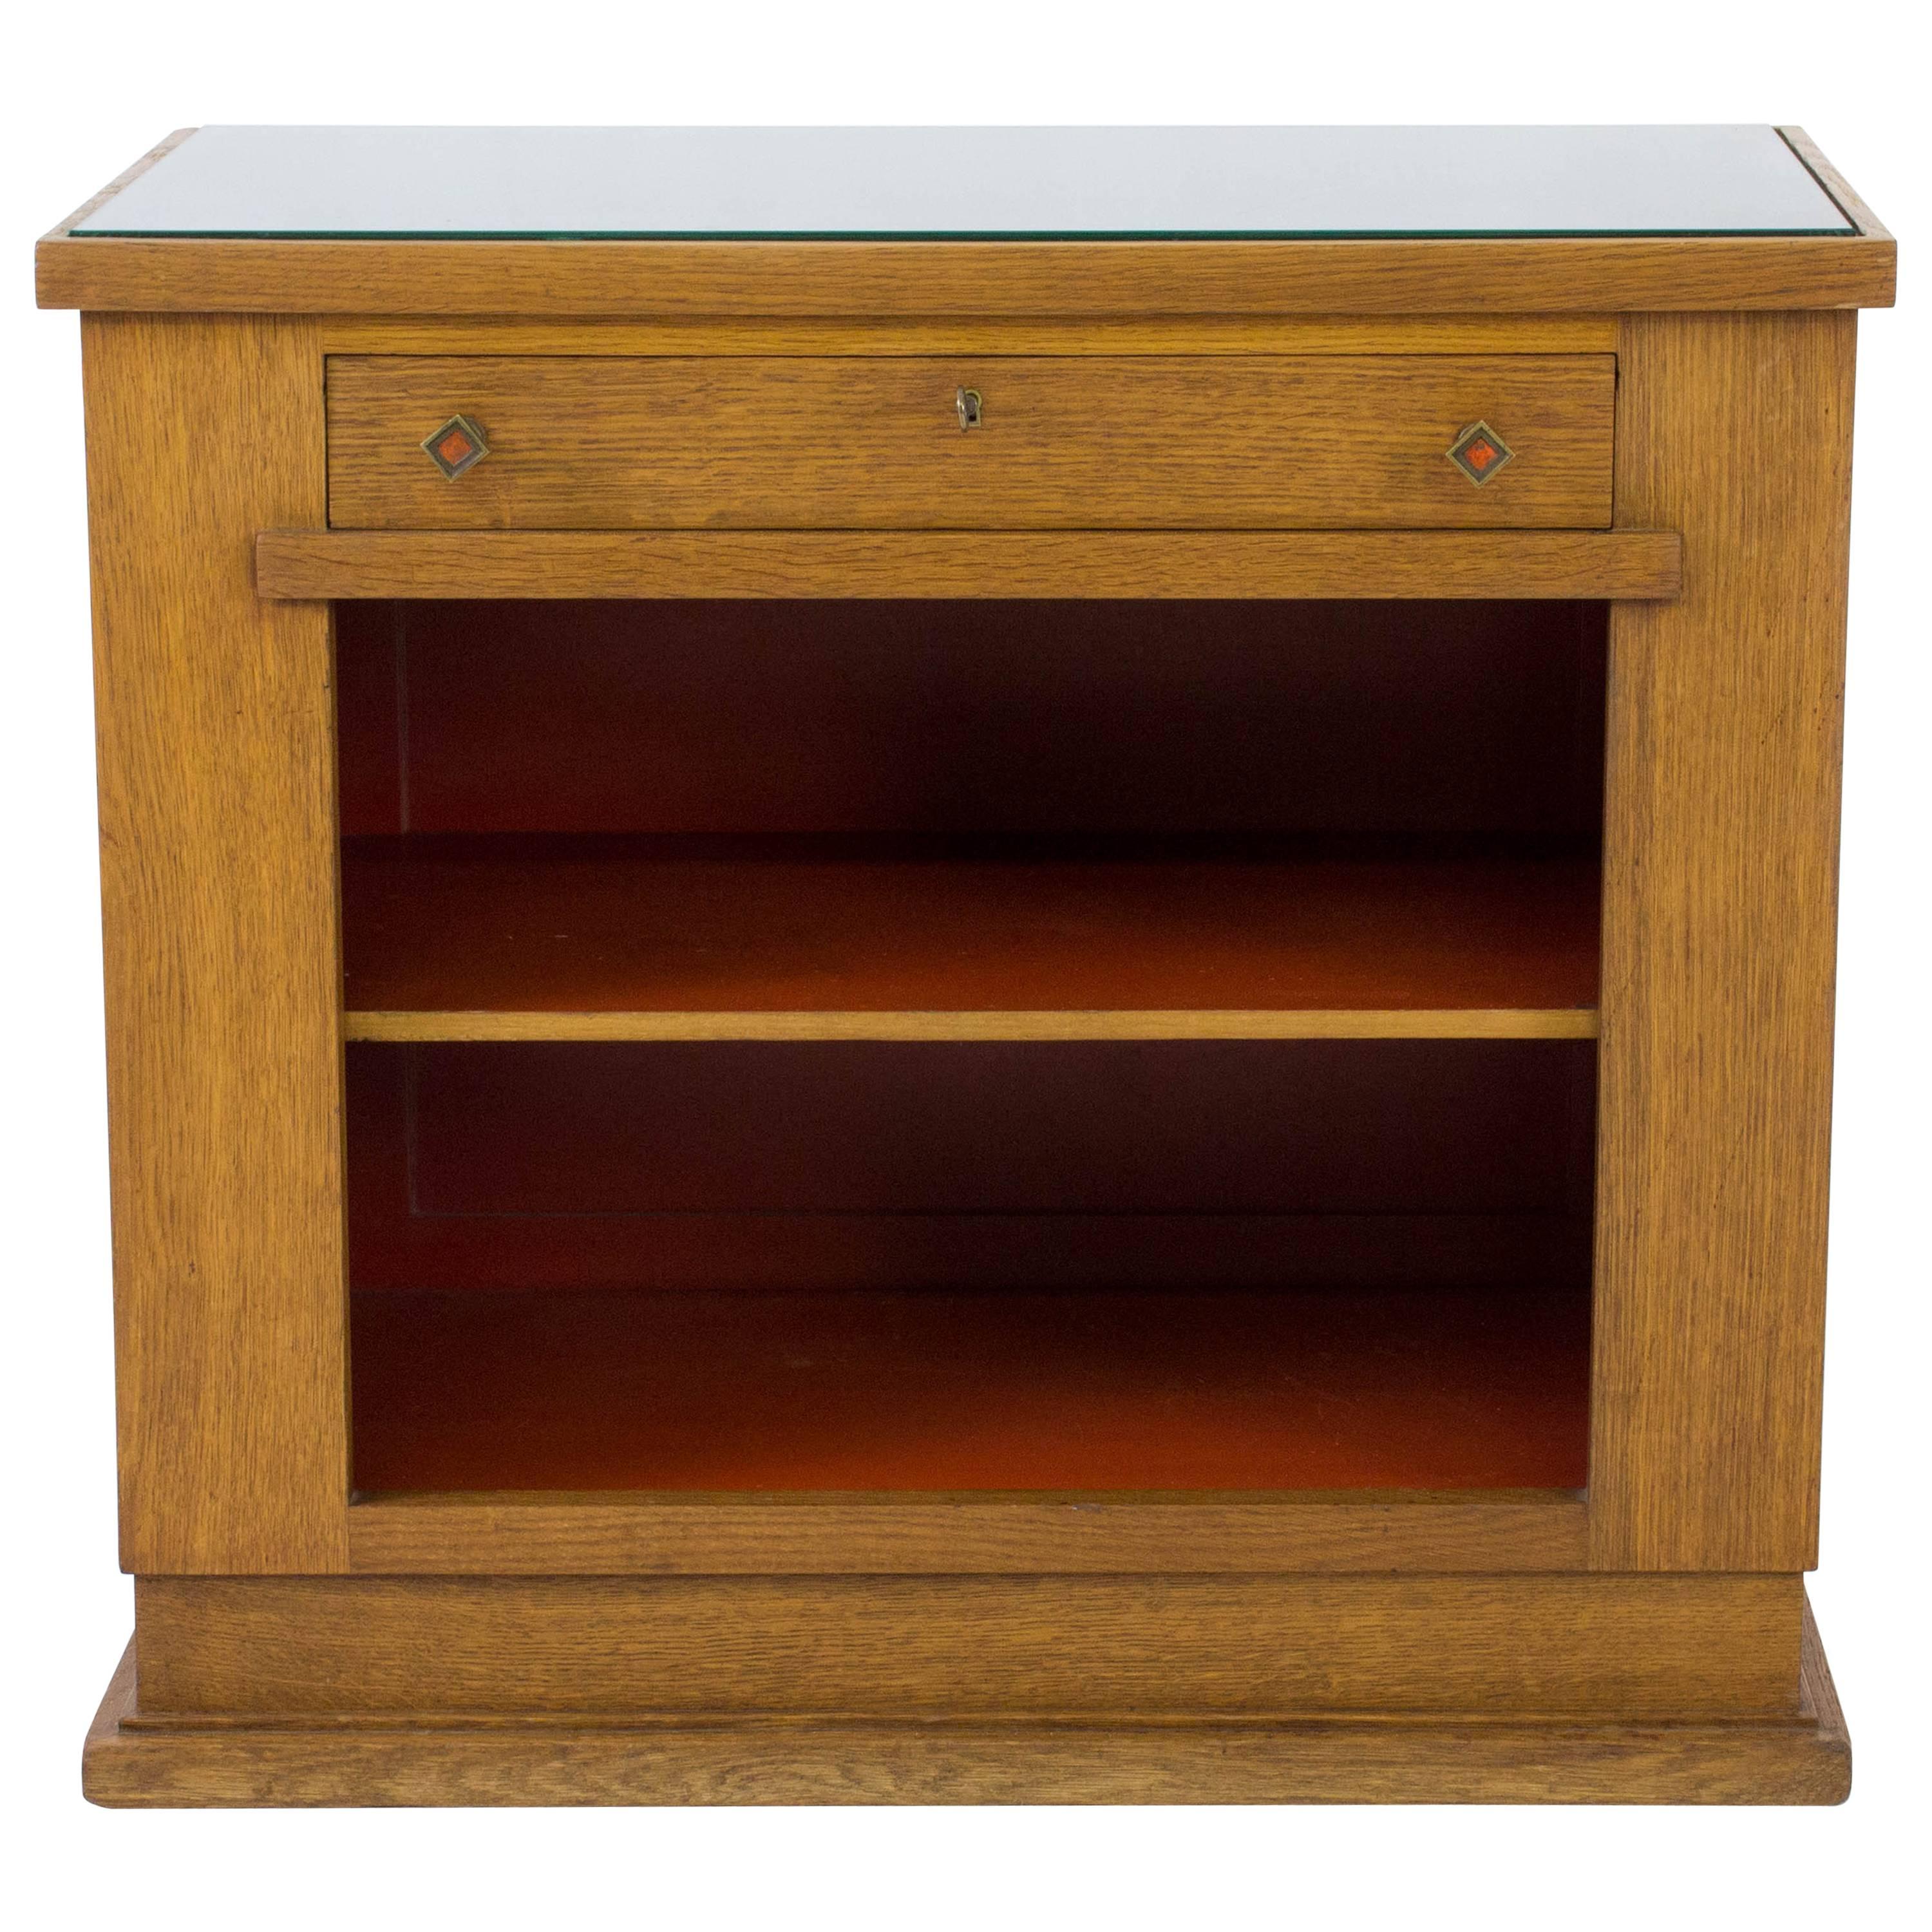 Rare Art Deco Haagse School Tea Cabinet by H.Wouda for Pander, 1924